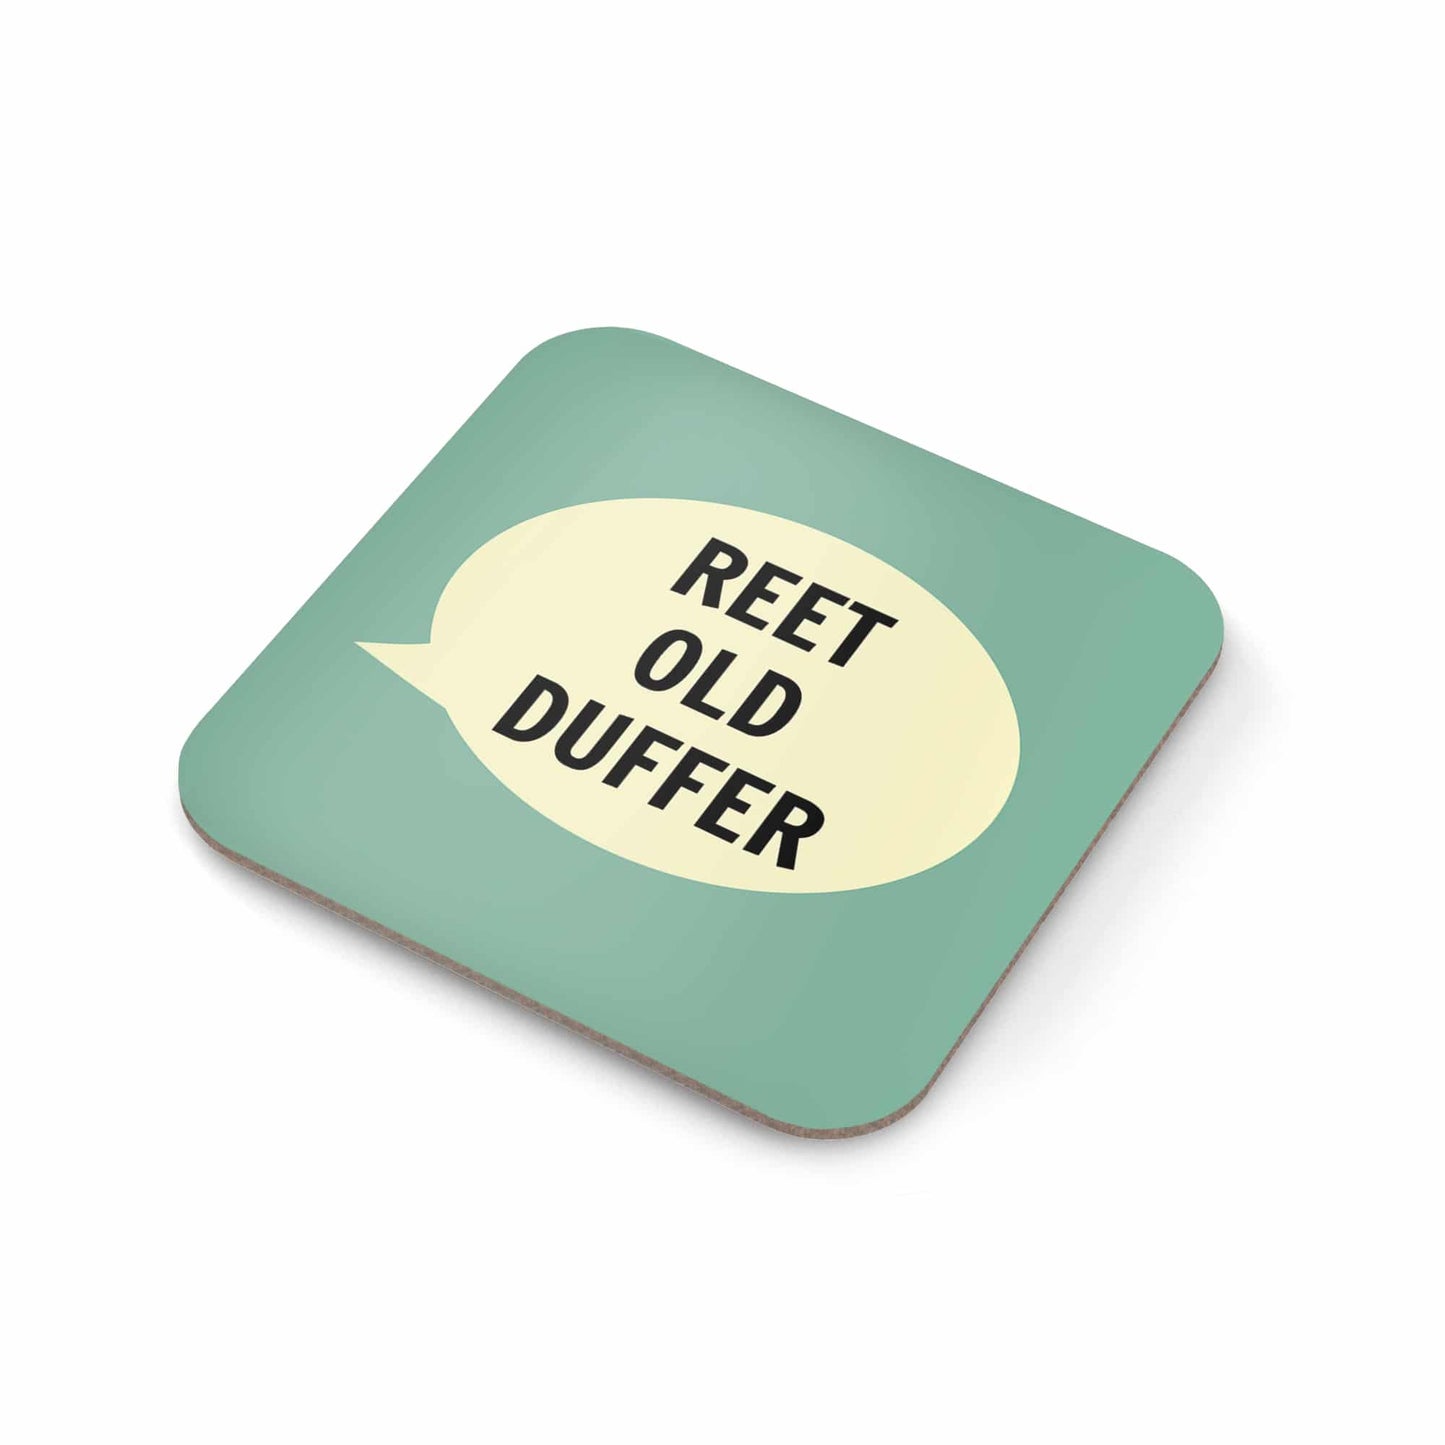 Reet Old Duffer Coaster - The Great Yorkshire Shop